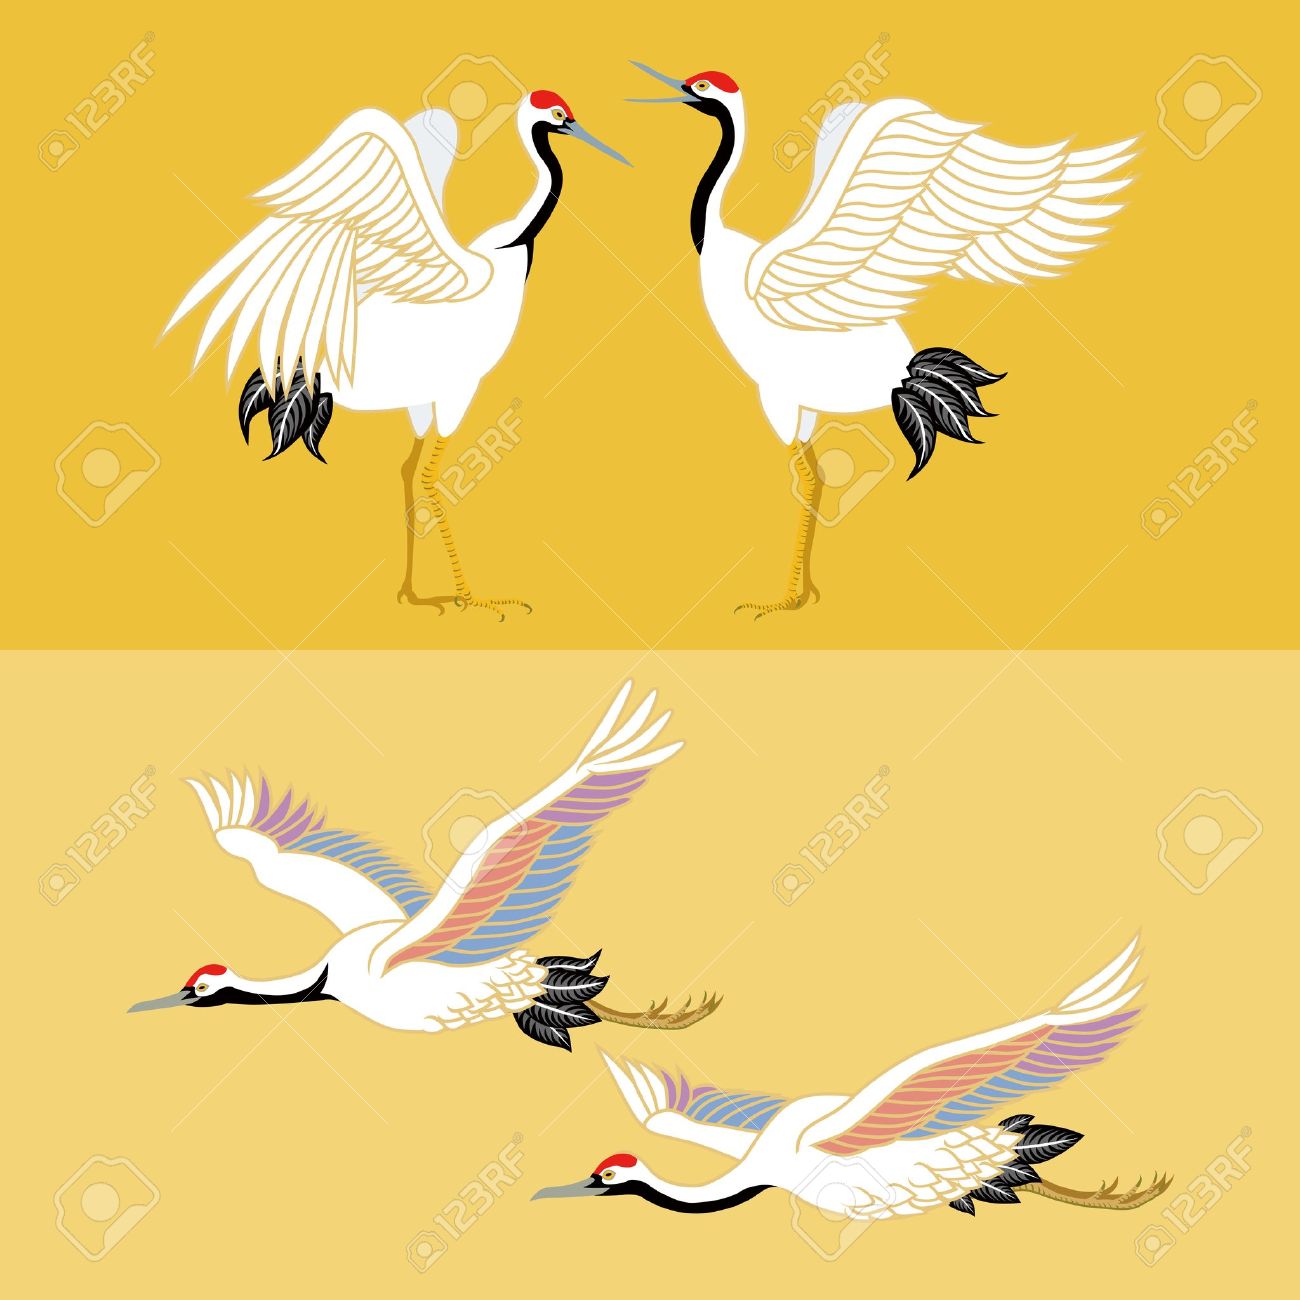 Japanese Crane clipart #18, Download drawings